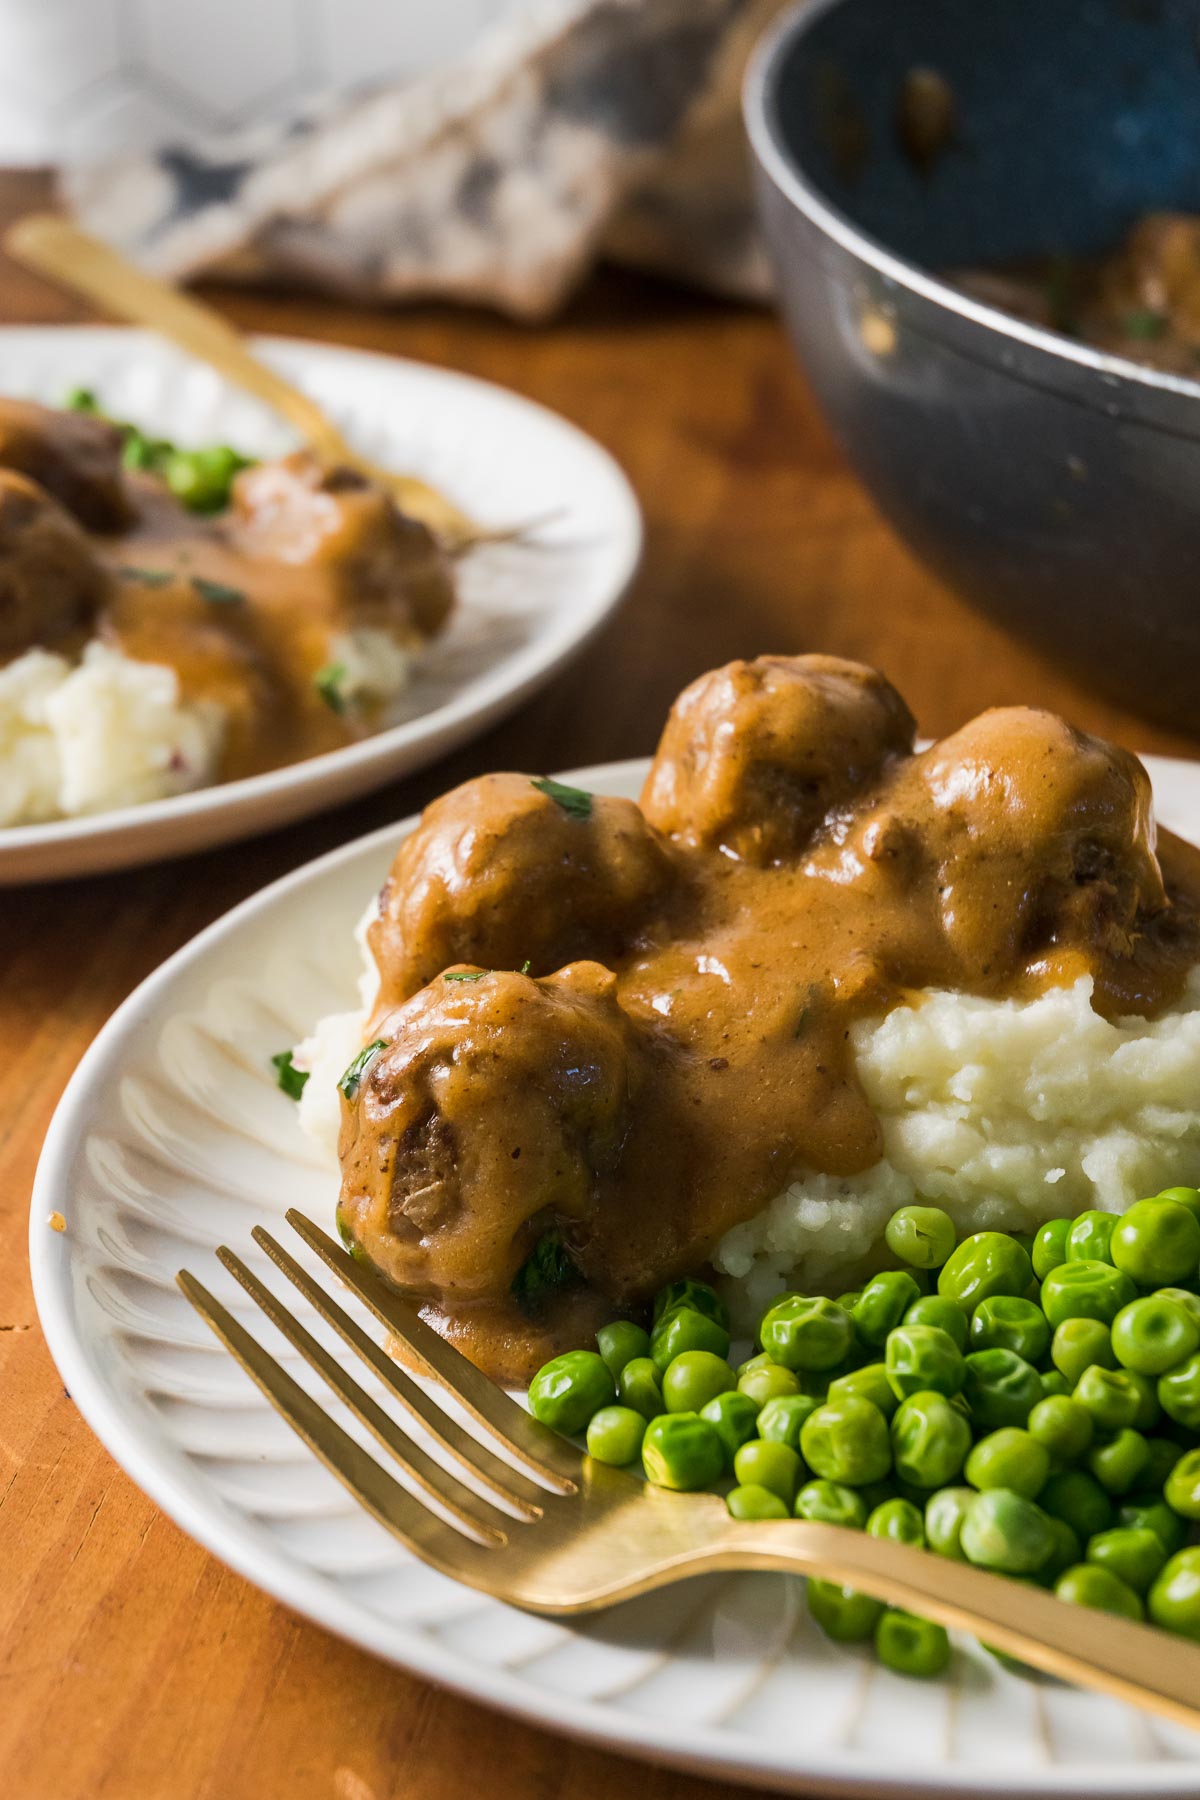 A dinner plate of crock pot Swedish meatballs, over mashed potatoes and peas.